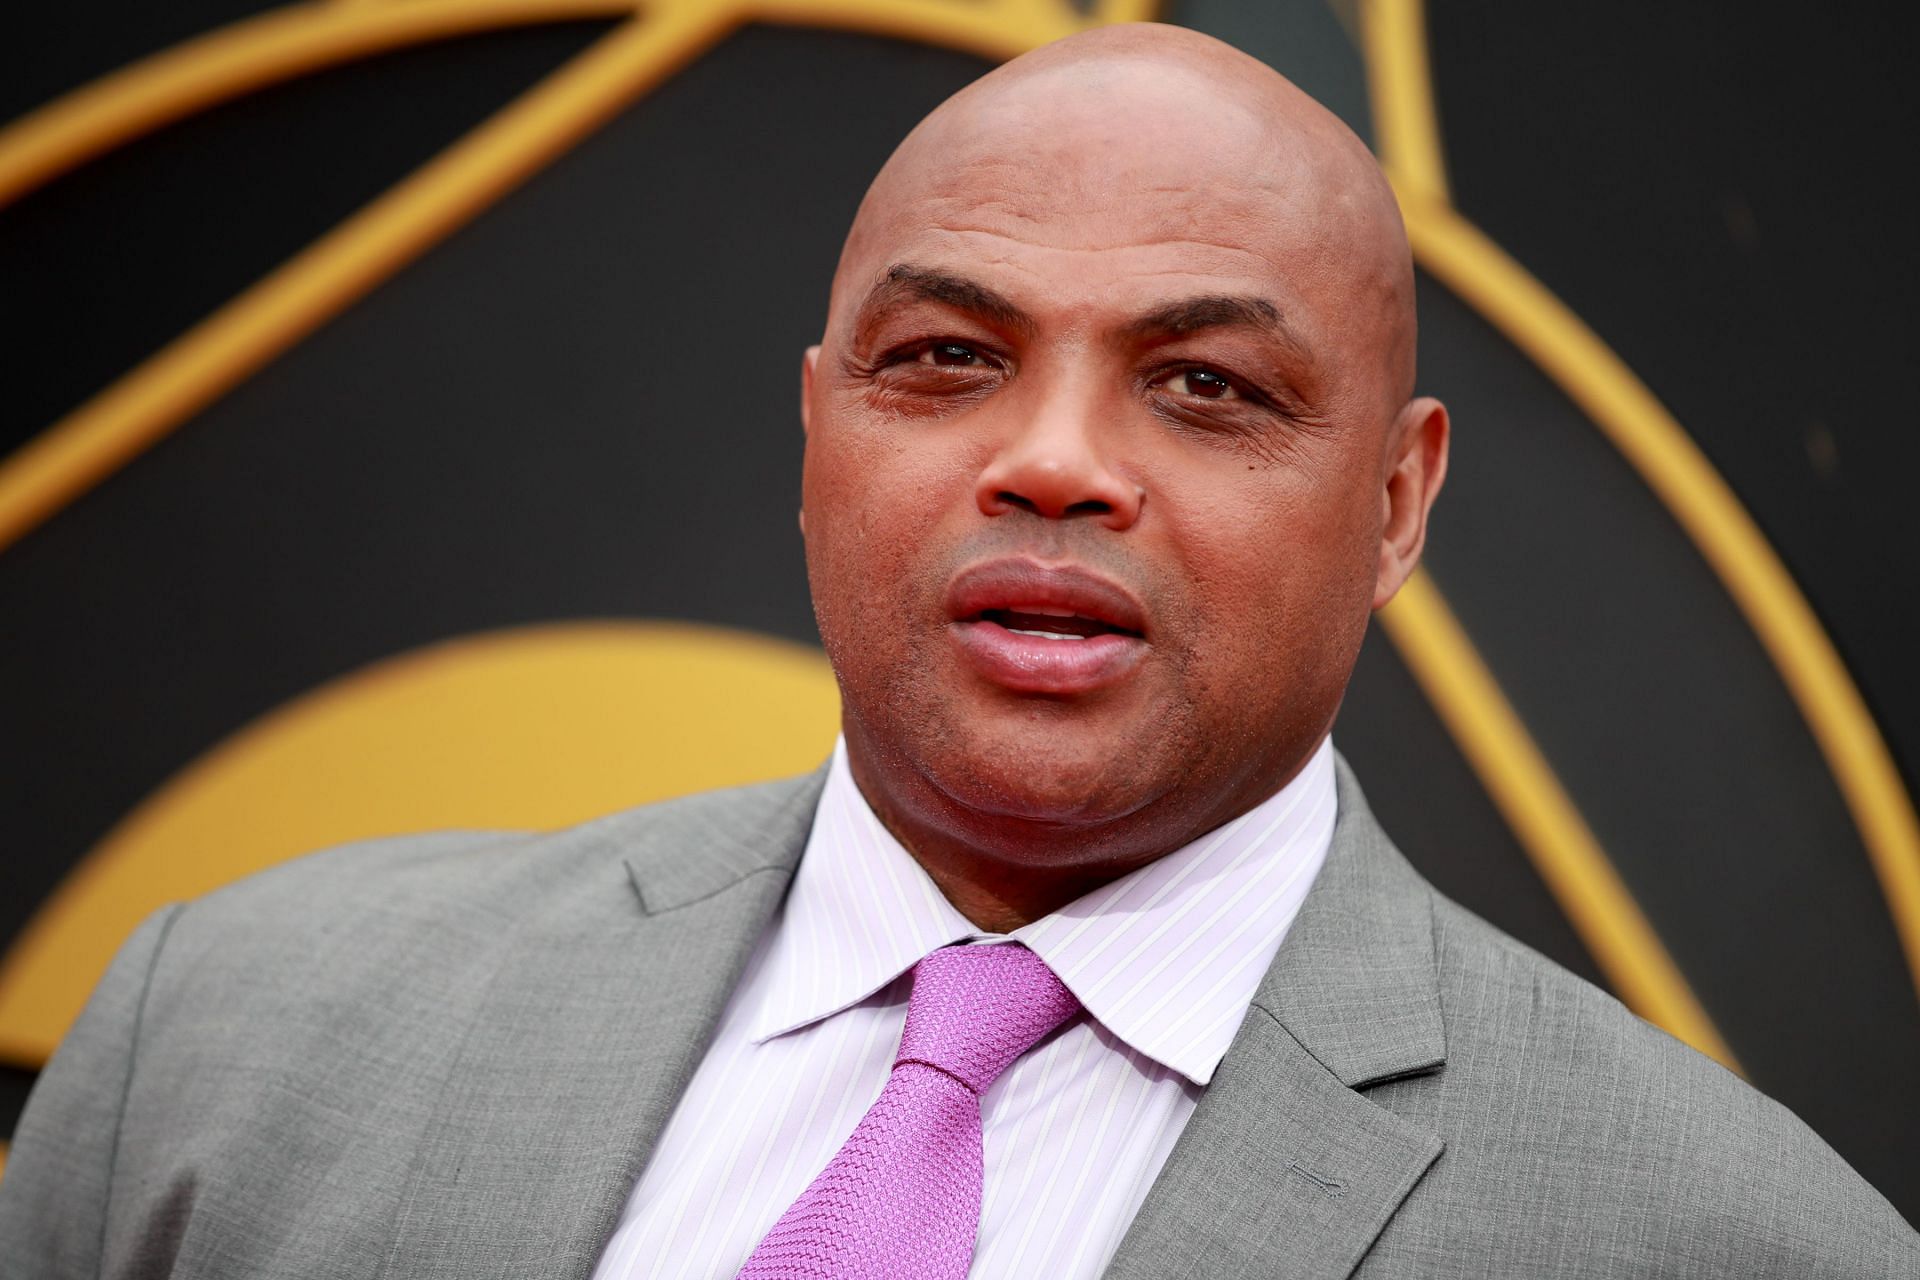 Pancakes, shakes and KFC: when Charles Barkley tried to eat his